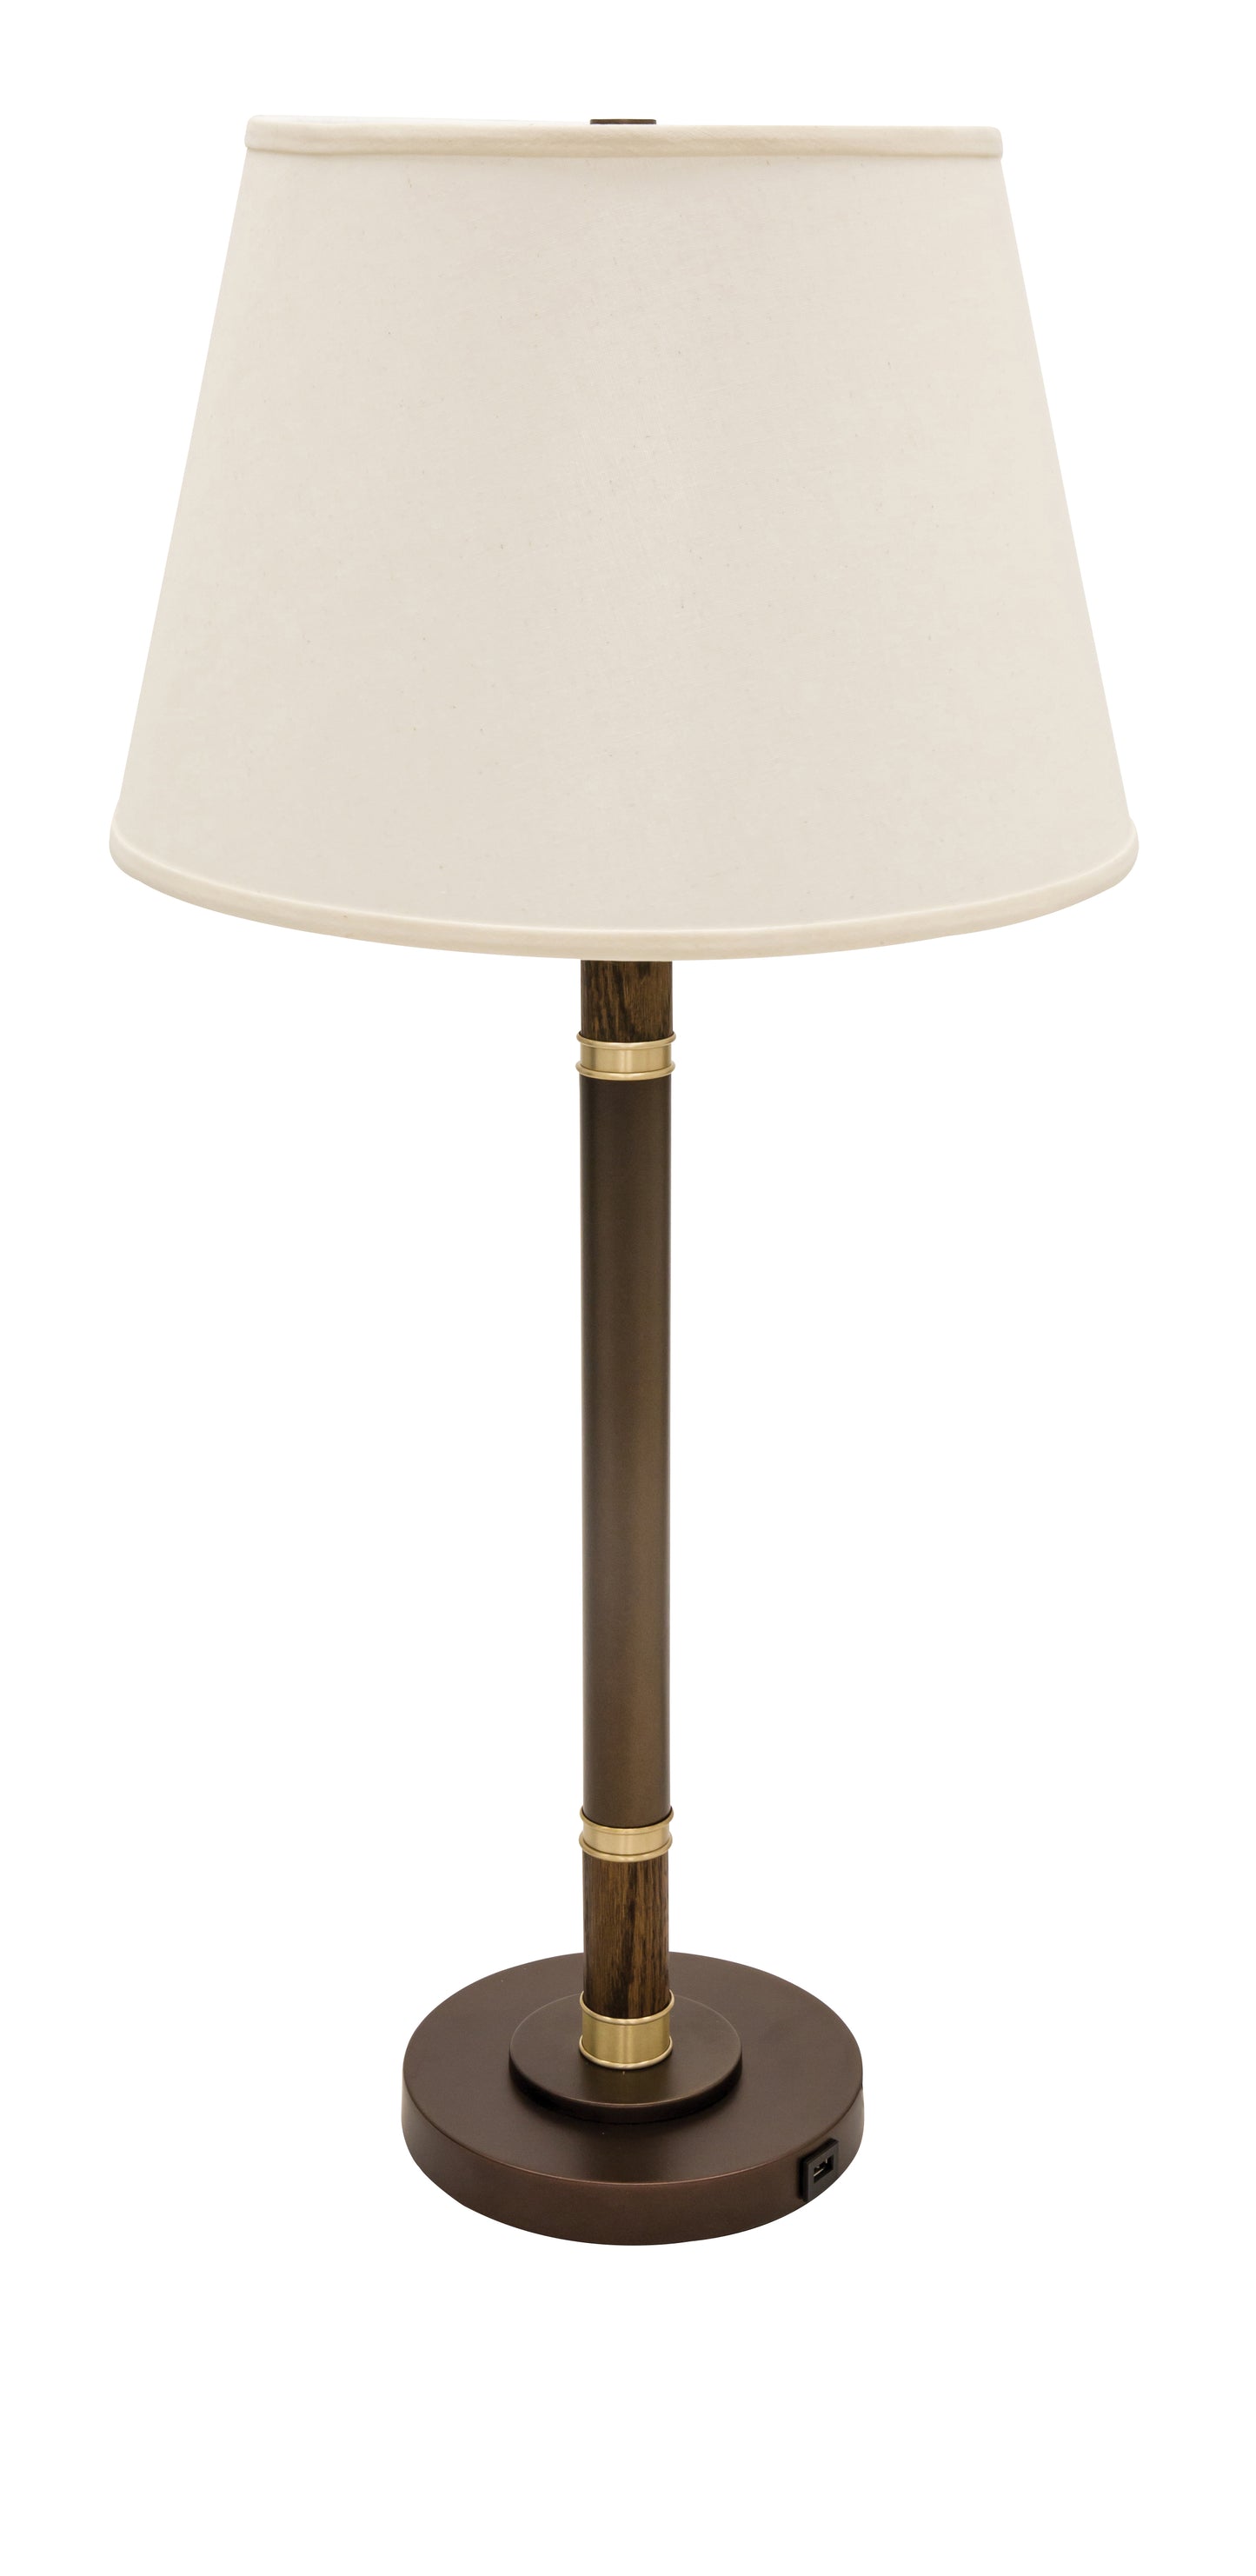 House of Troy Barton 32.5" Table Lamp in Chestnut Bronze BA750-CHB